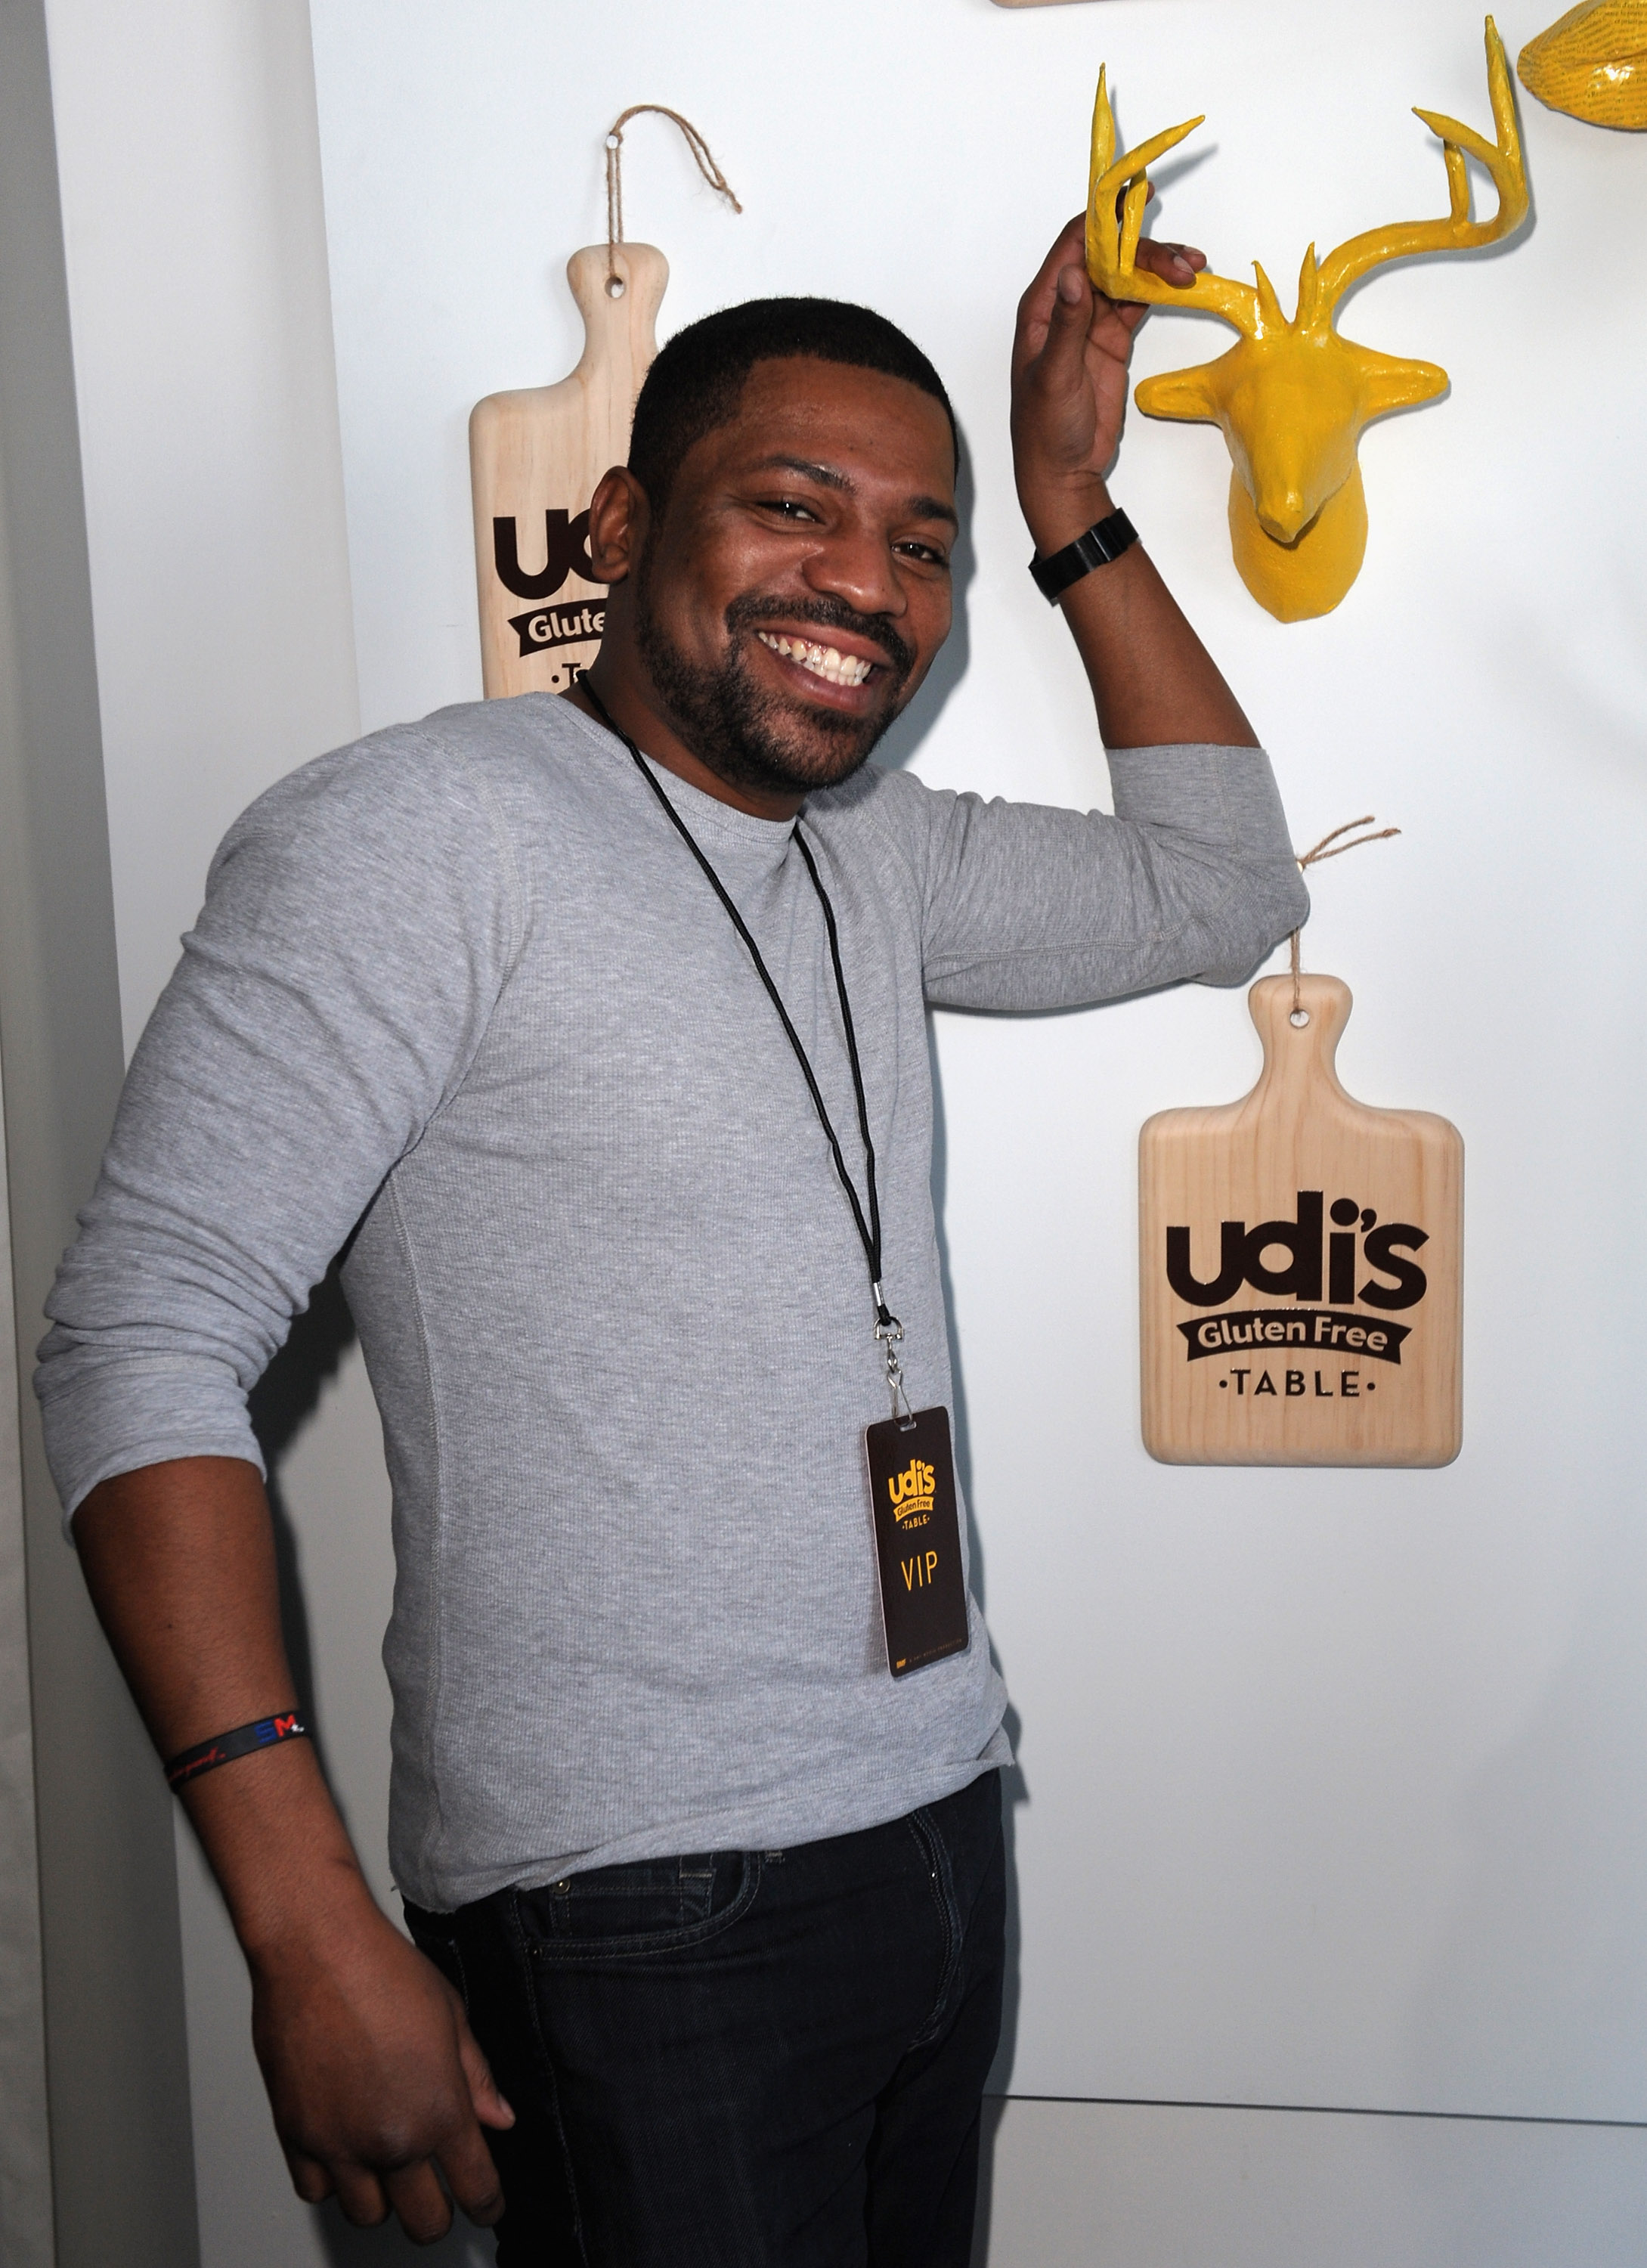 PARK CITY, UT - JANUARY 18:  Mekhi Phifer attends the Udi's Gluten Free Cafe on January 18, 2013 in Park City, Utah.  (Photo by Gustavo Caballero/Getty Images for Udi's Gluten Free Table)